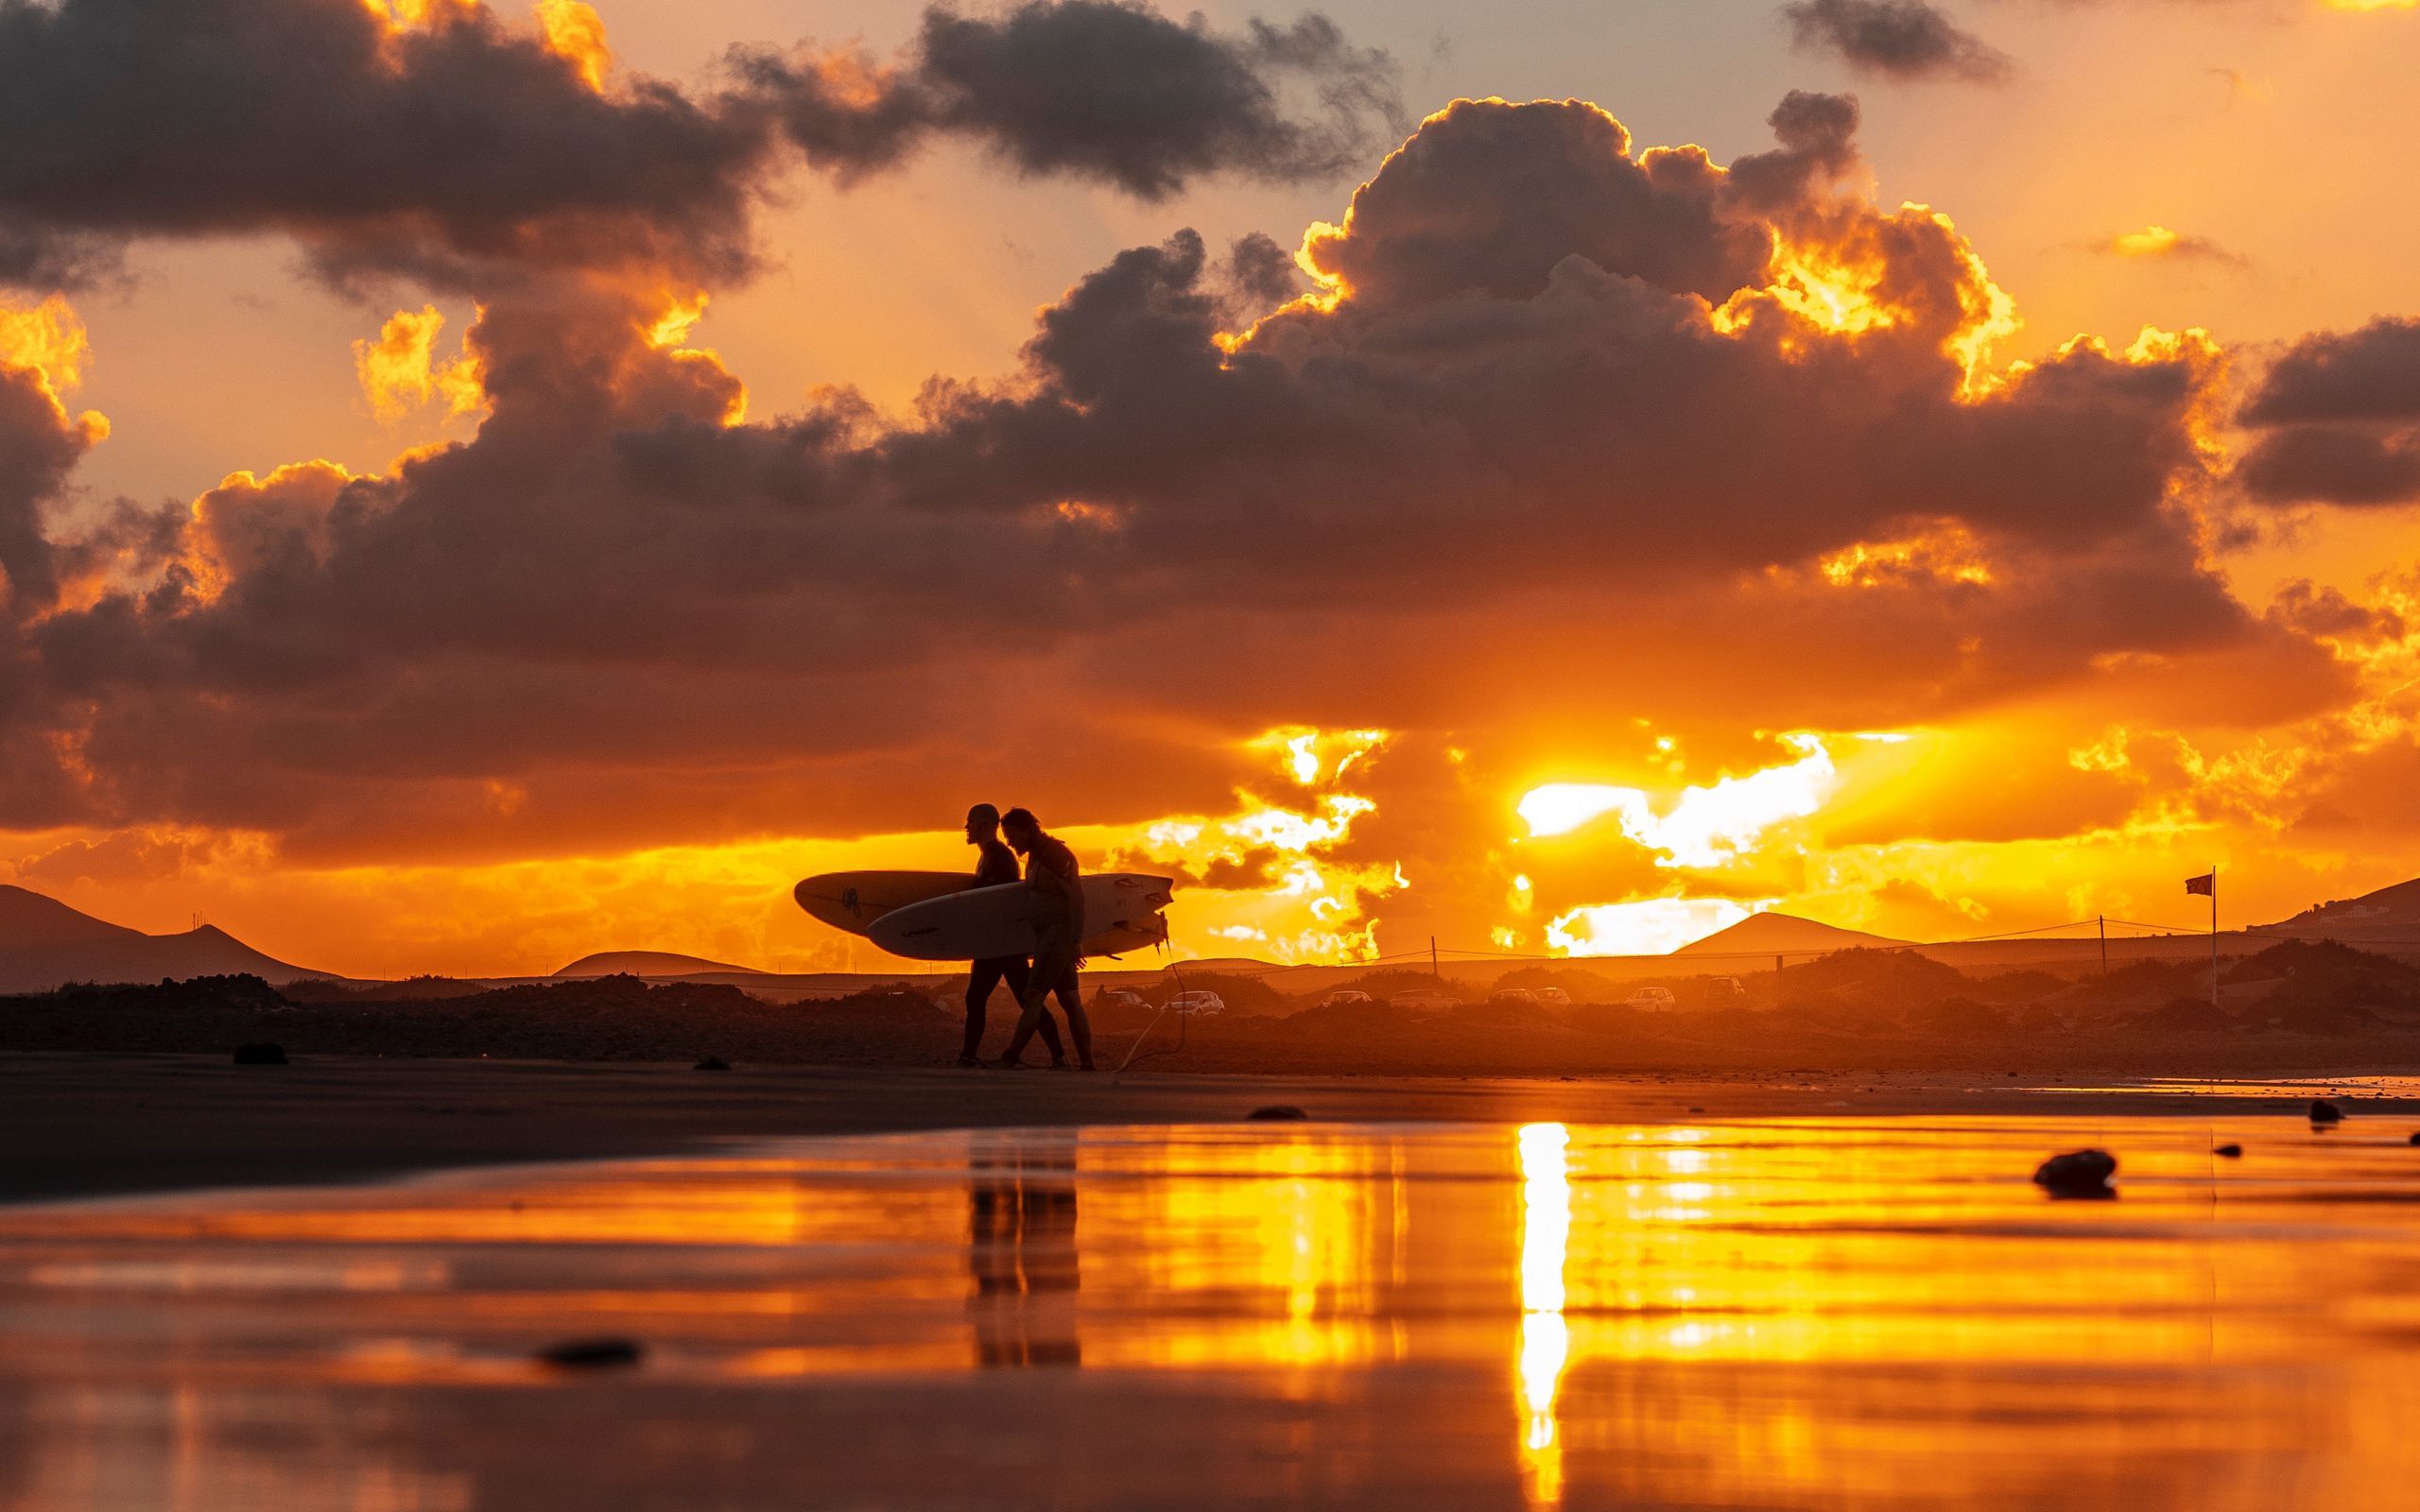 Download wallpaper 2560x1600 ocean, silhouettes, surfing, surfers